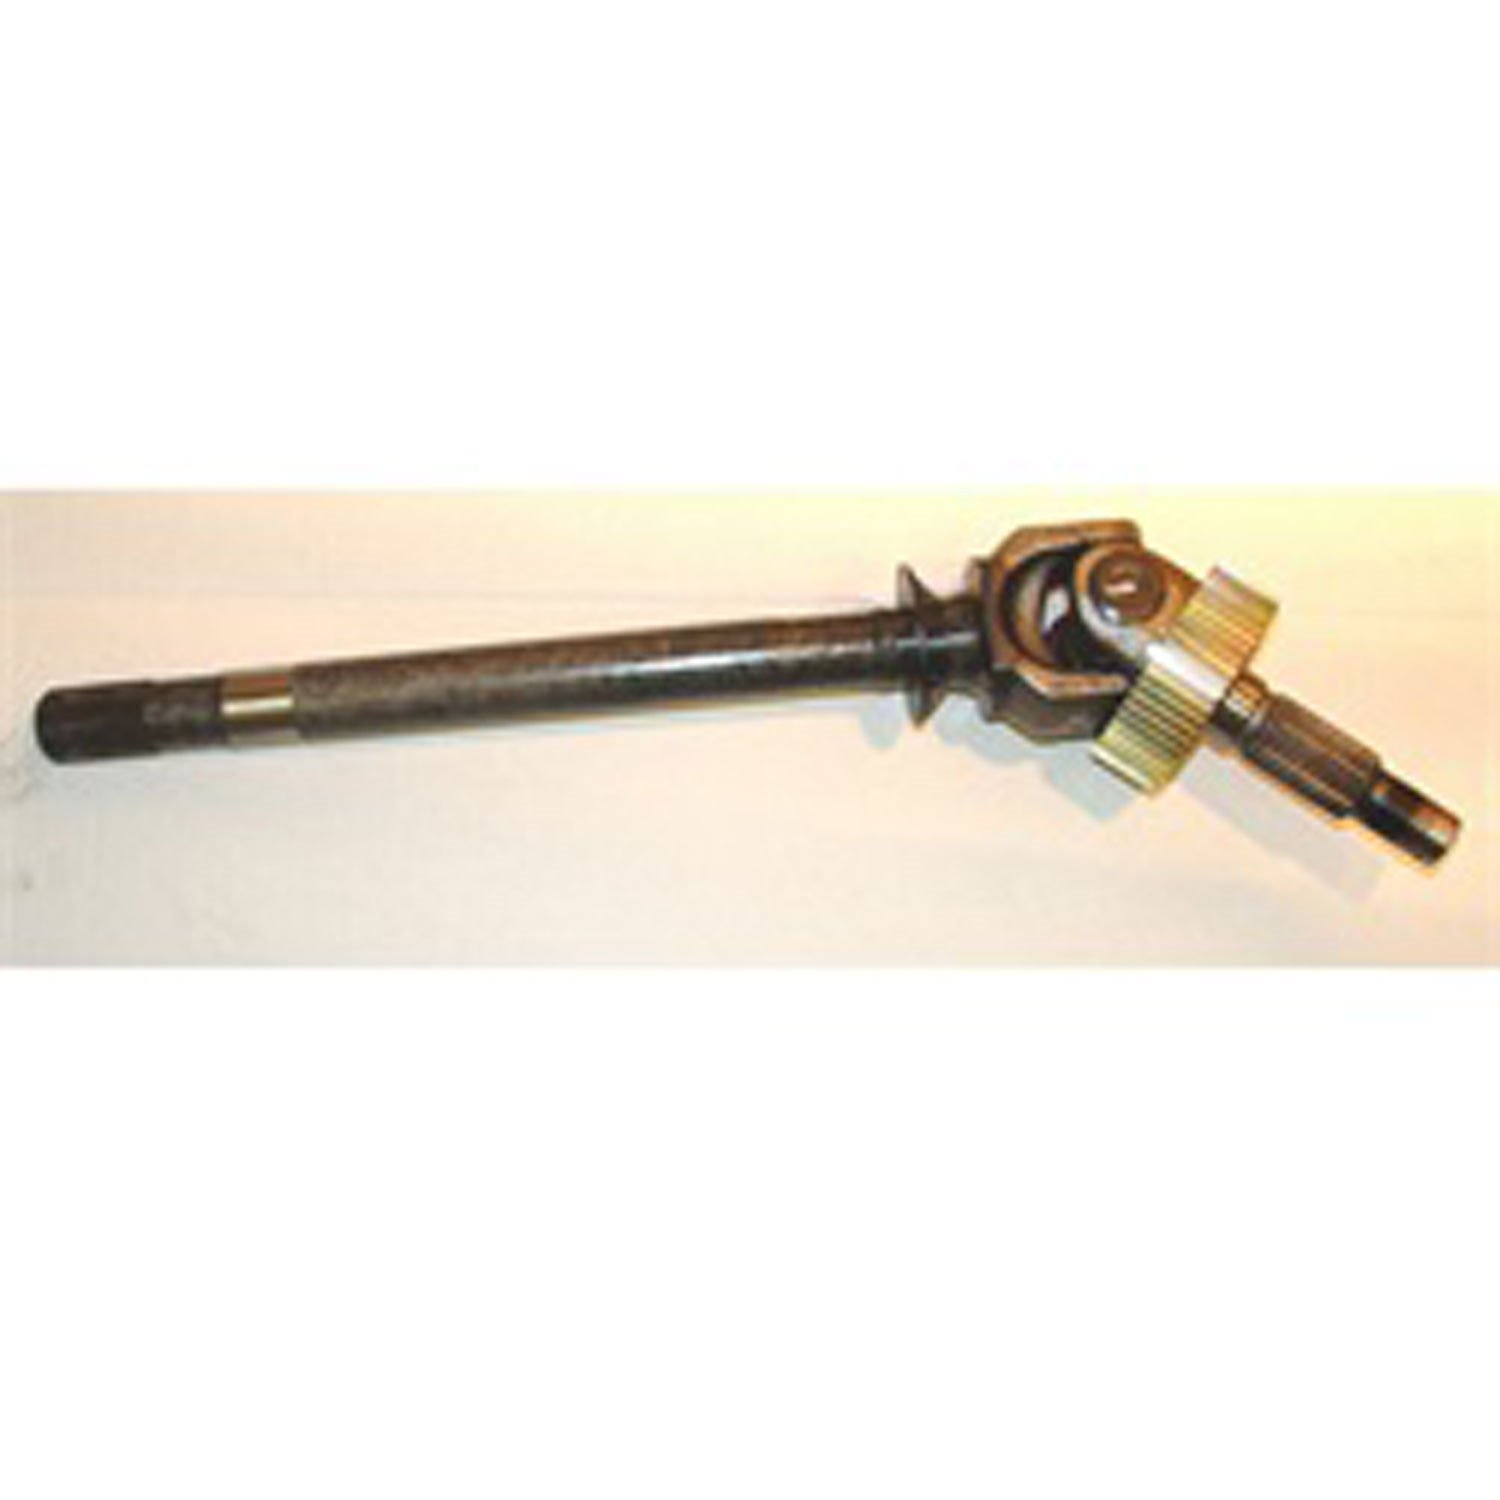 This front axle shaft assembly for Dana 30 from Omix-ADA fits the left side. The inner / outer axle